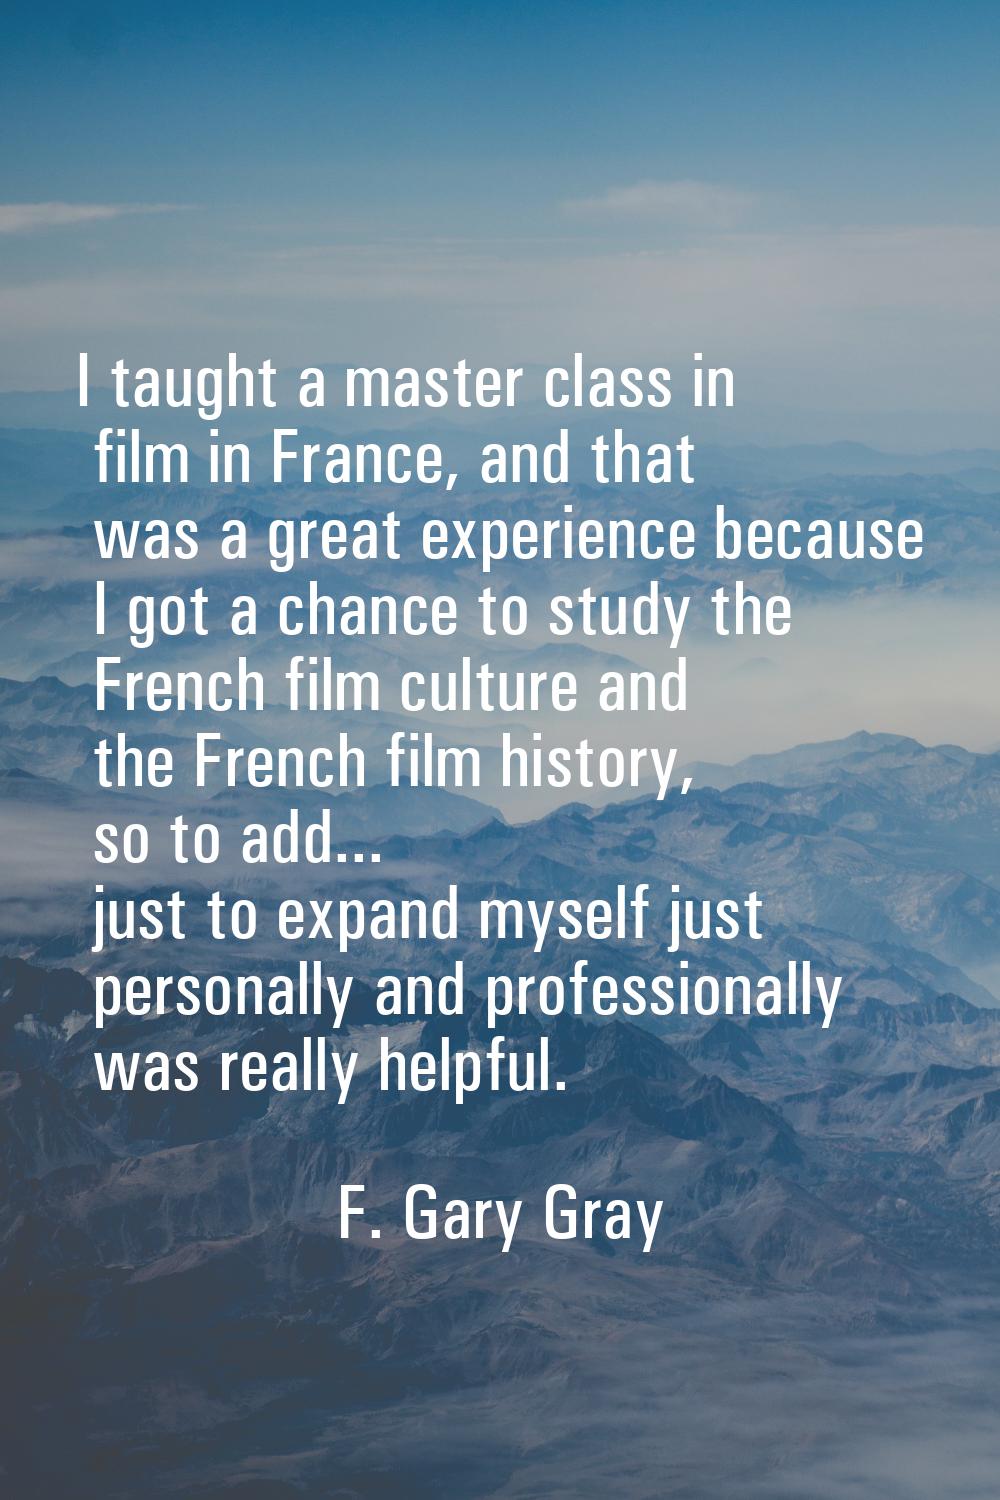 I taught a master class in film in France, and that was a great experience because I got a chance t